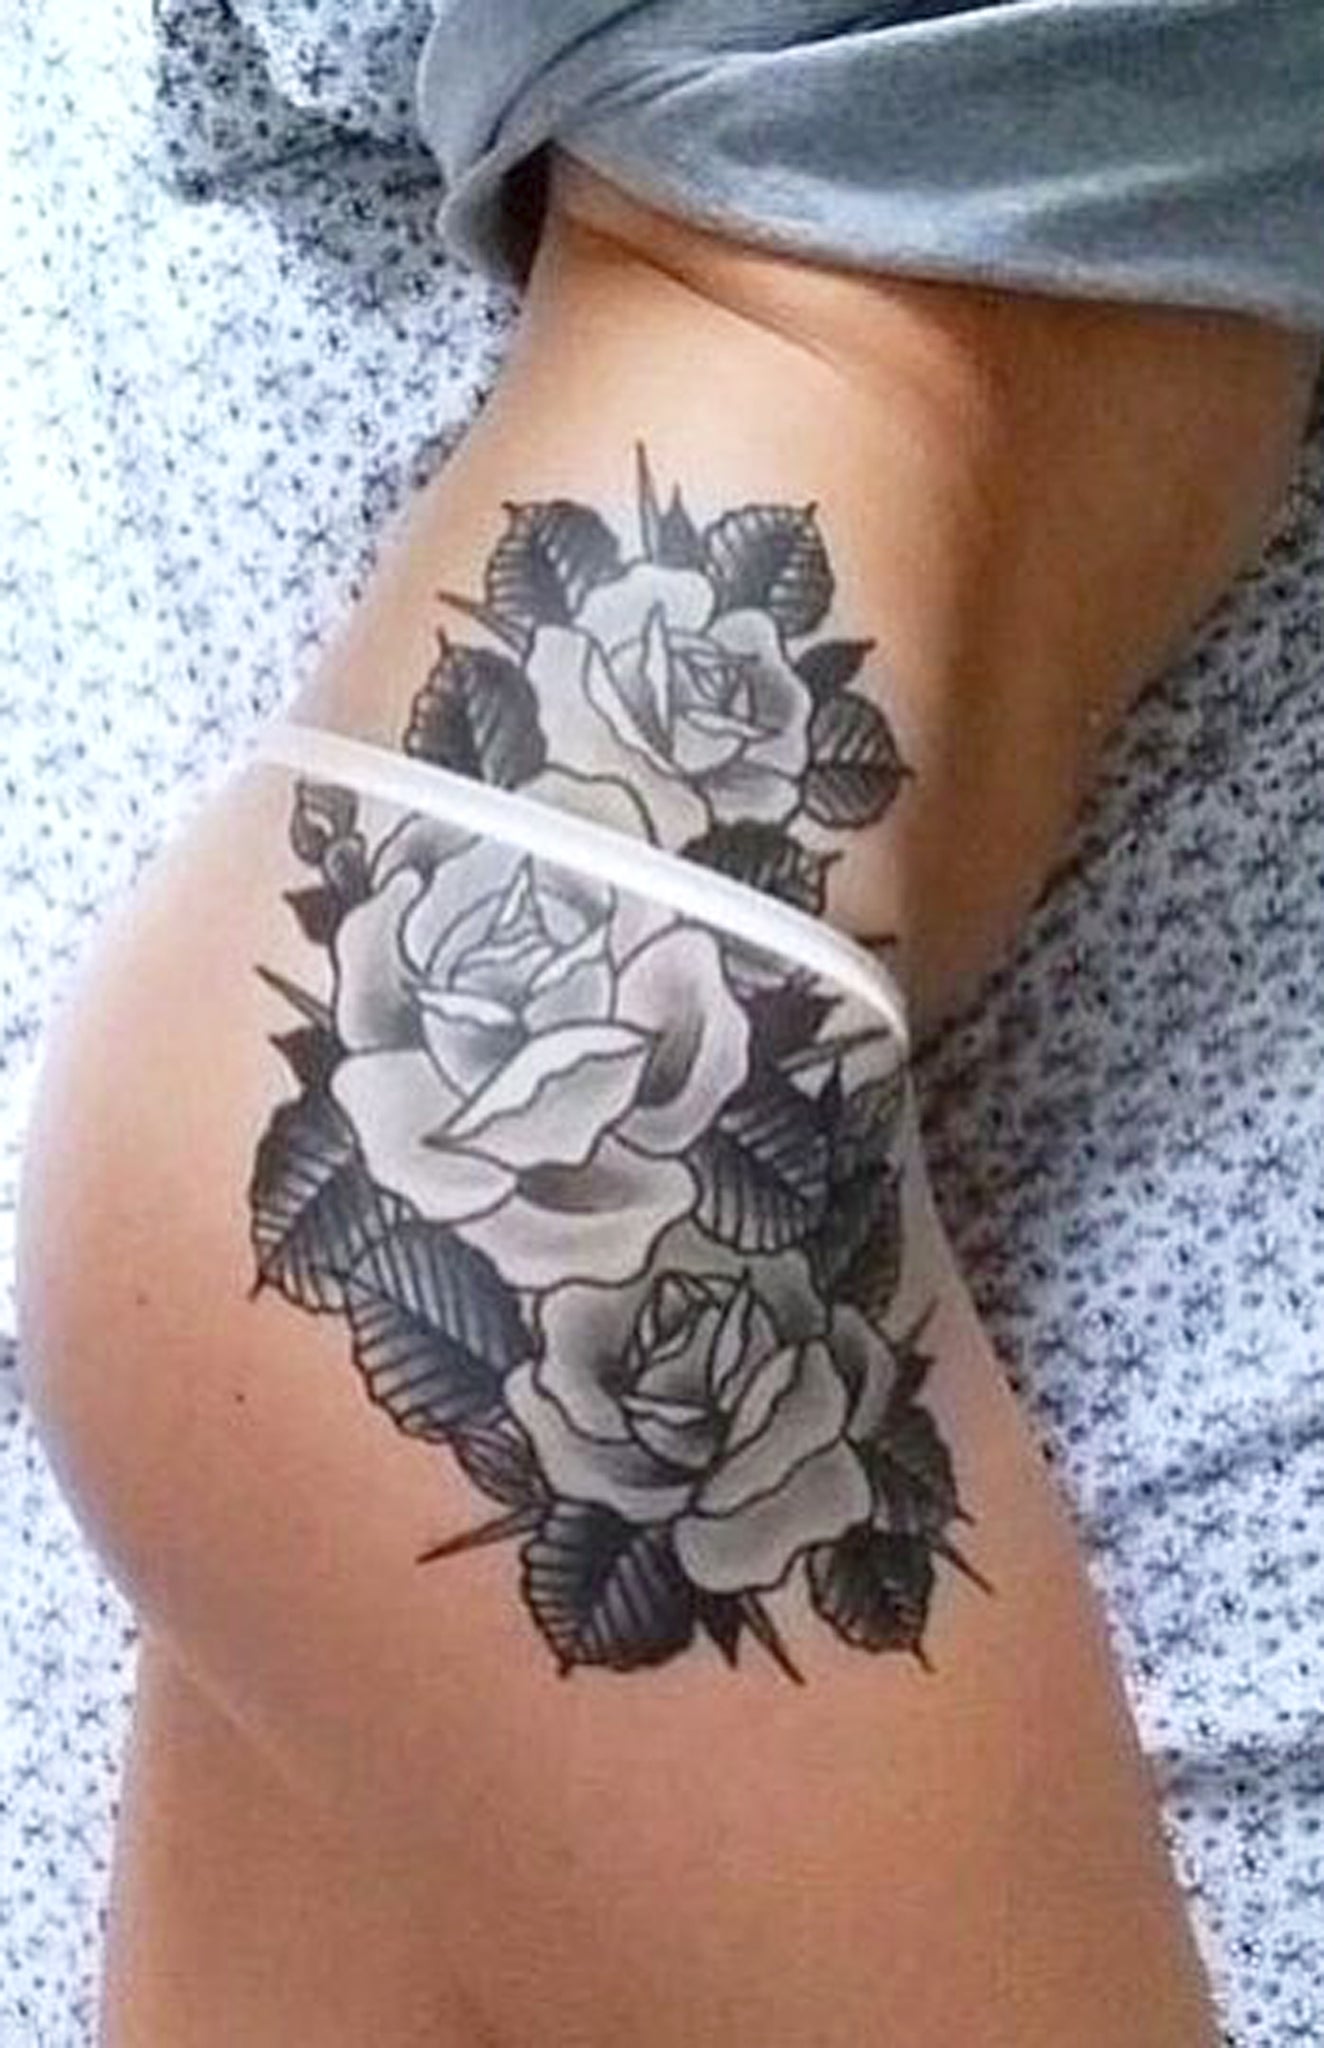 Hip Tattoos 48 Most Beautiful and Irresistible Hip Tattoo Ideas for Women